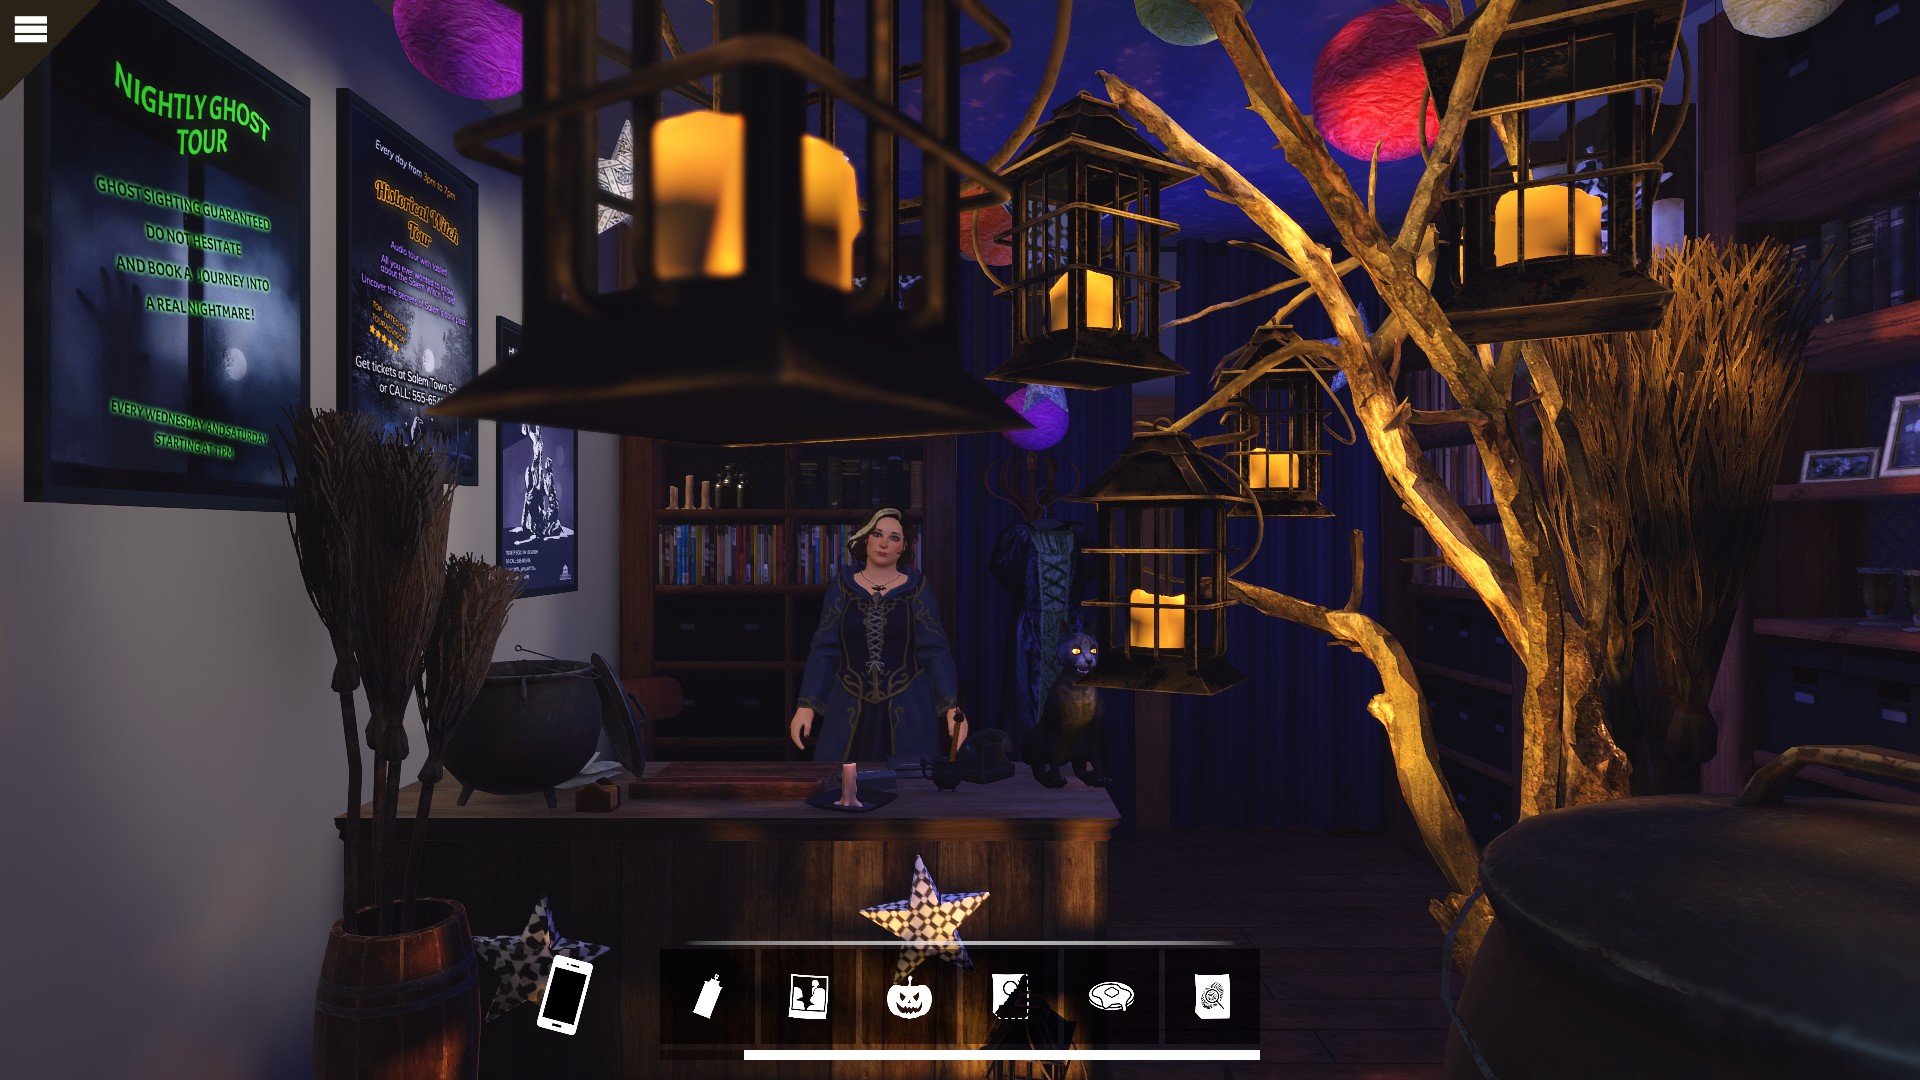 play nancy drew games online for free